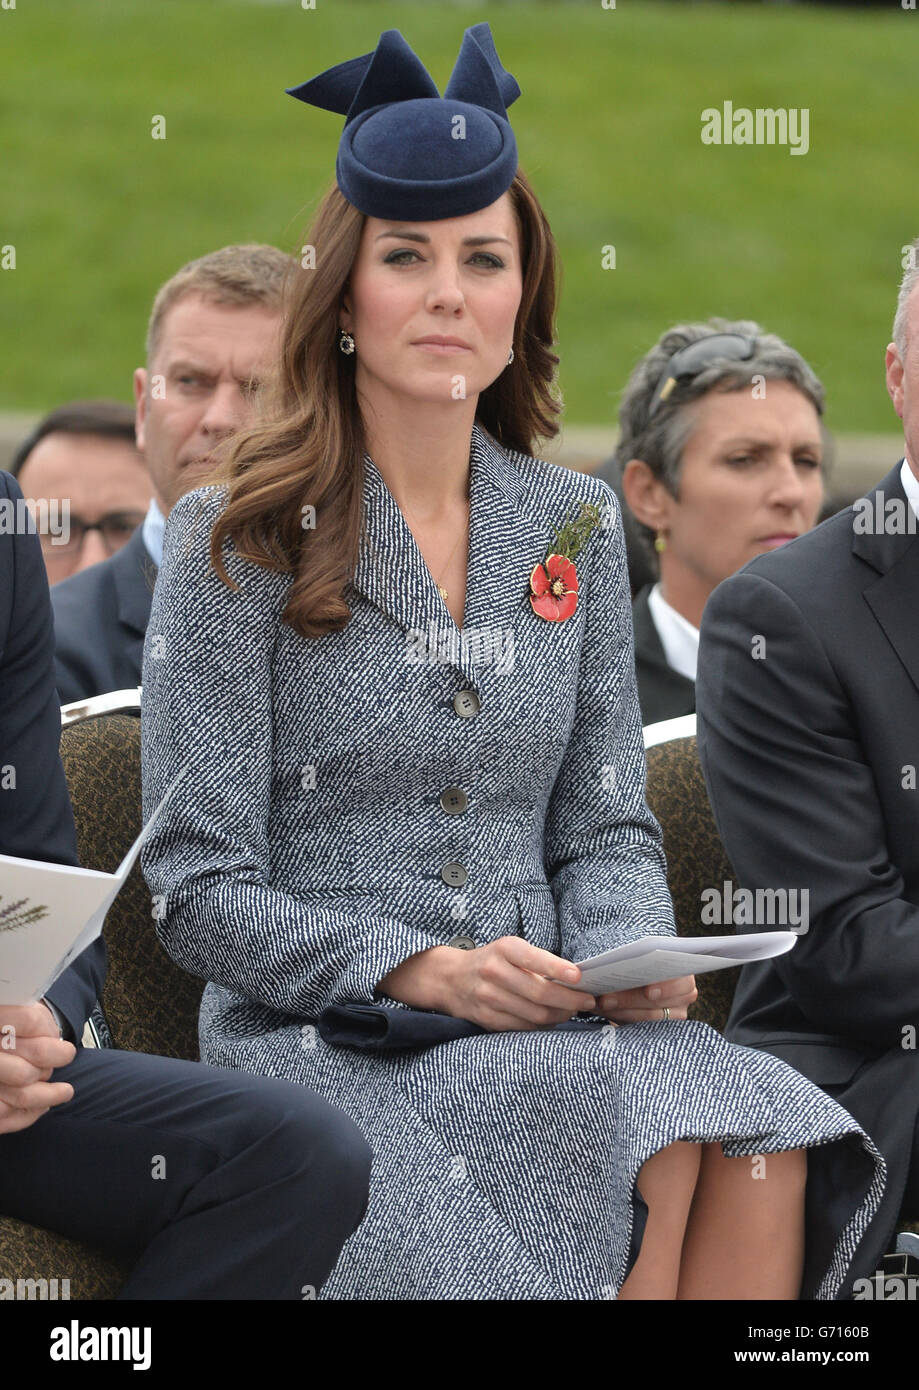 The Duke and Duchess of Cambridge attend the ANZAC March and Commemorative Service and lay a wreath before planting a 'Lone Pine' tree in the Memorial Garden in Canberra during the eighteenth day of their official tour to New Zealand and Australia. Stock Photo